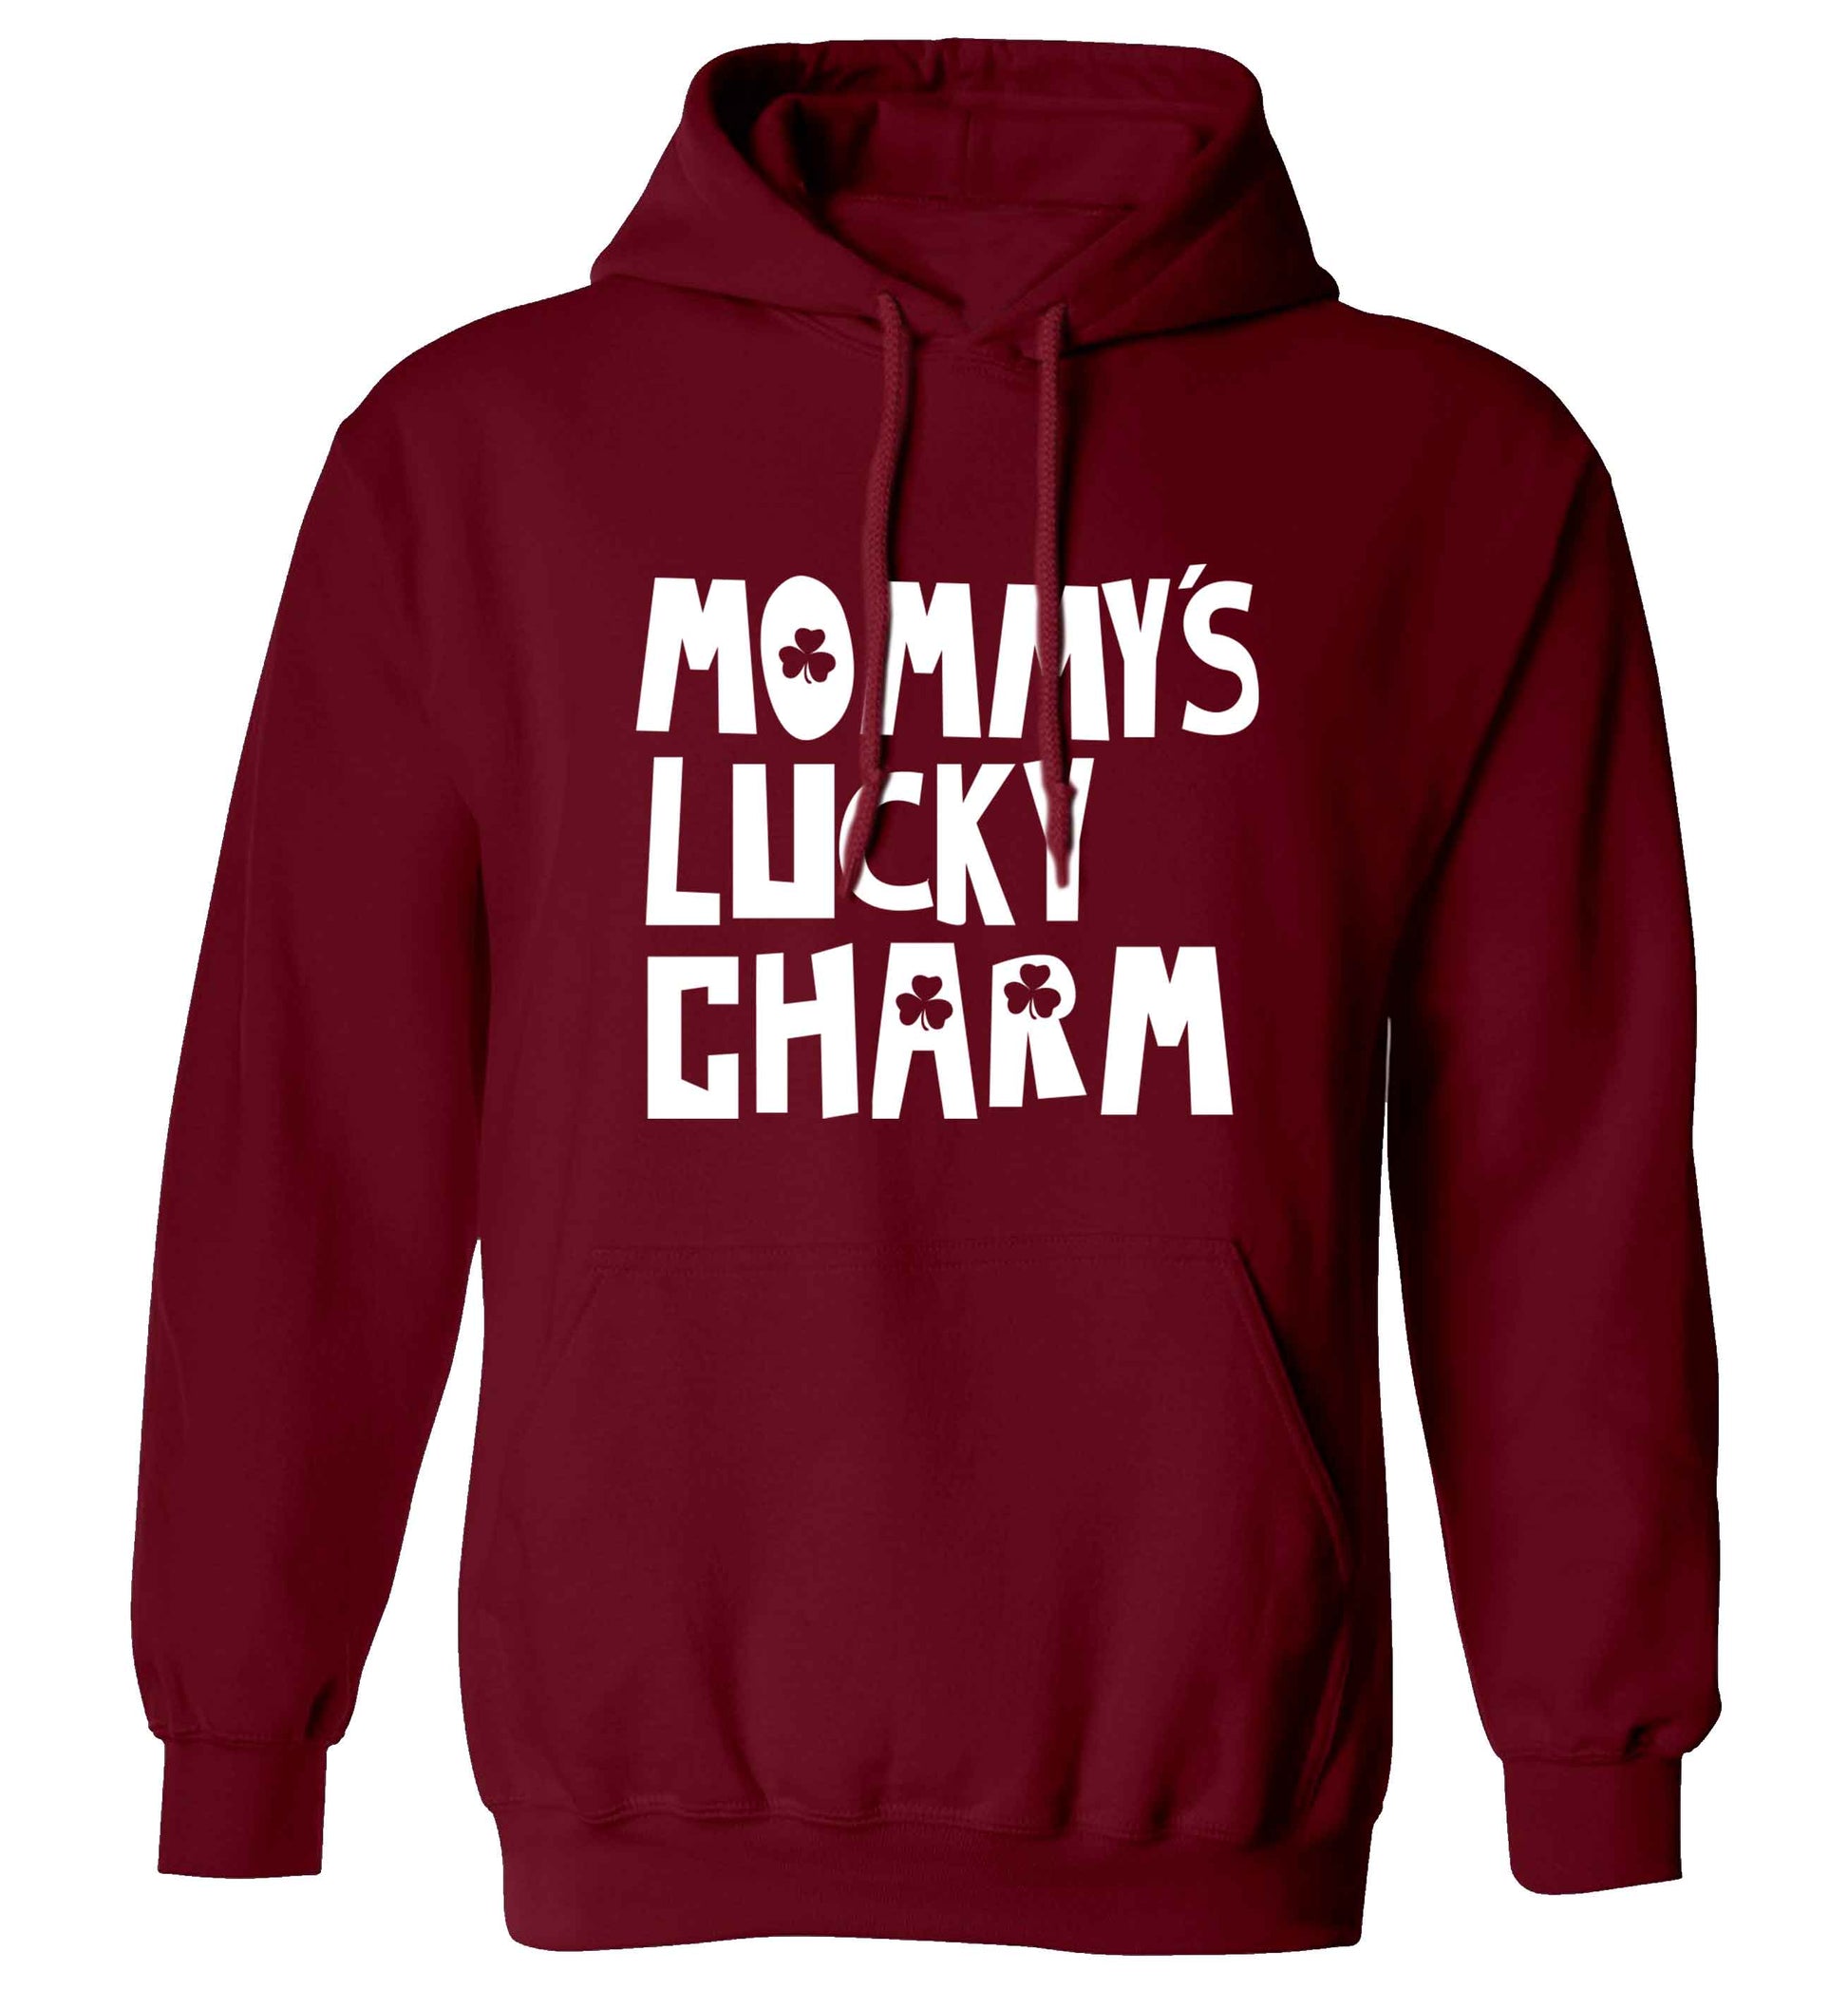 Mommy's lucky charm adults unisex maroon hoodie 2XL